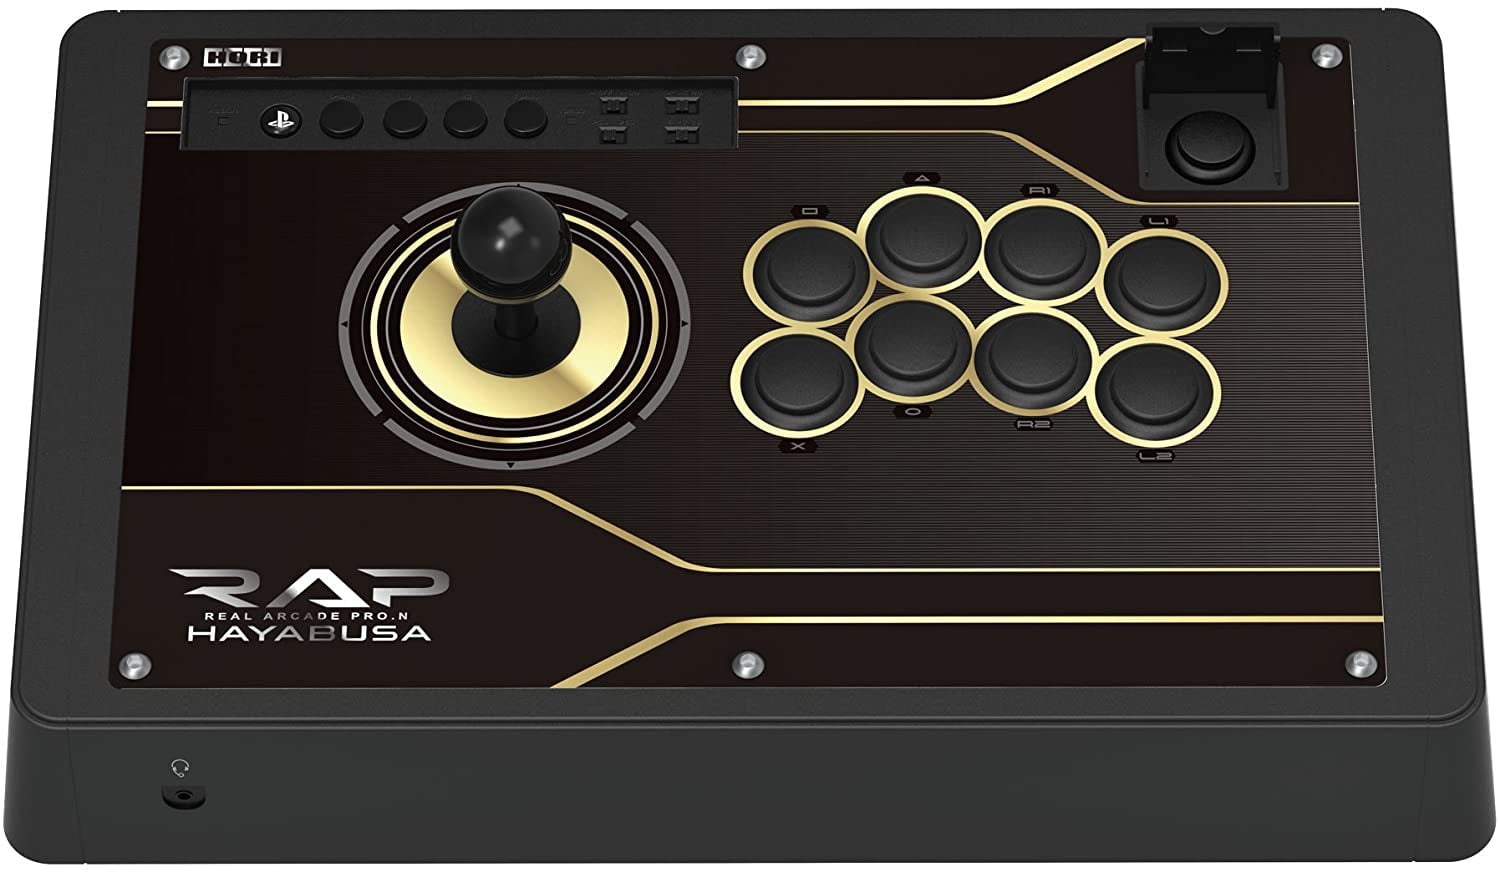 Hori Real Arcade Pro N Hayabusa Arcade Fight Stick For Playstation 4 Playstation 3 And Pc Officially Licensed By Sony Playstation 4 Walmart Com